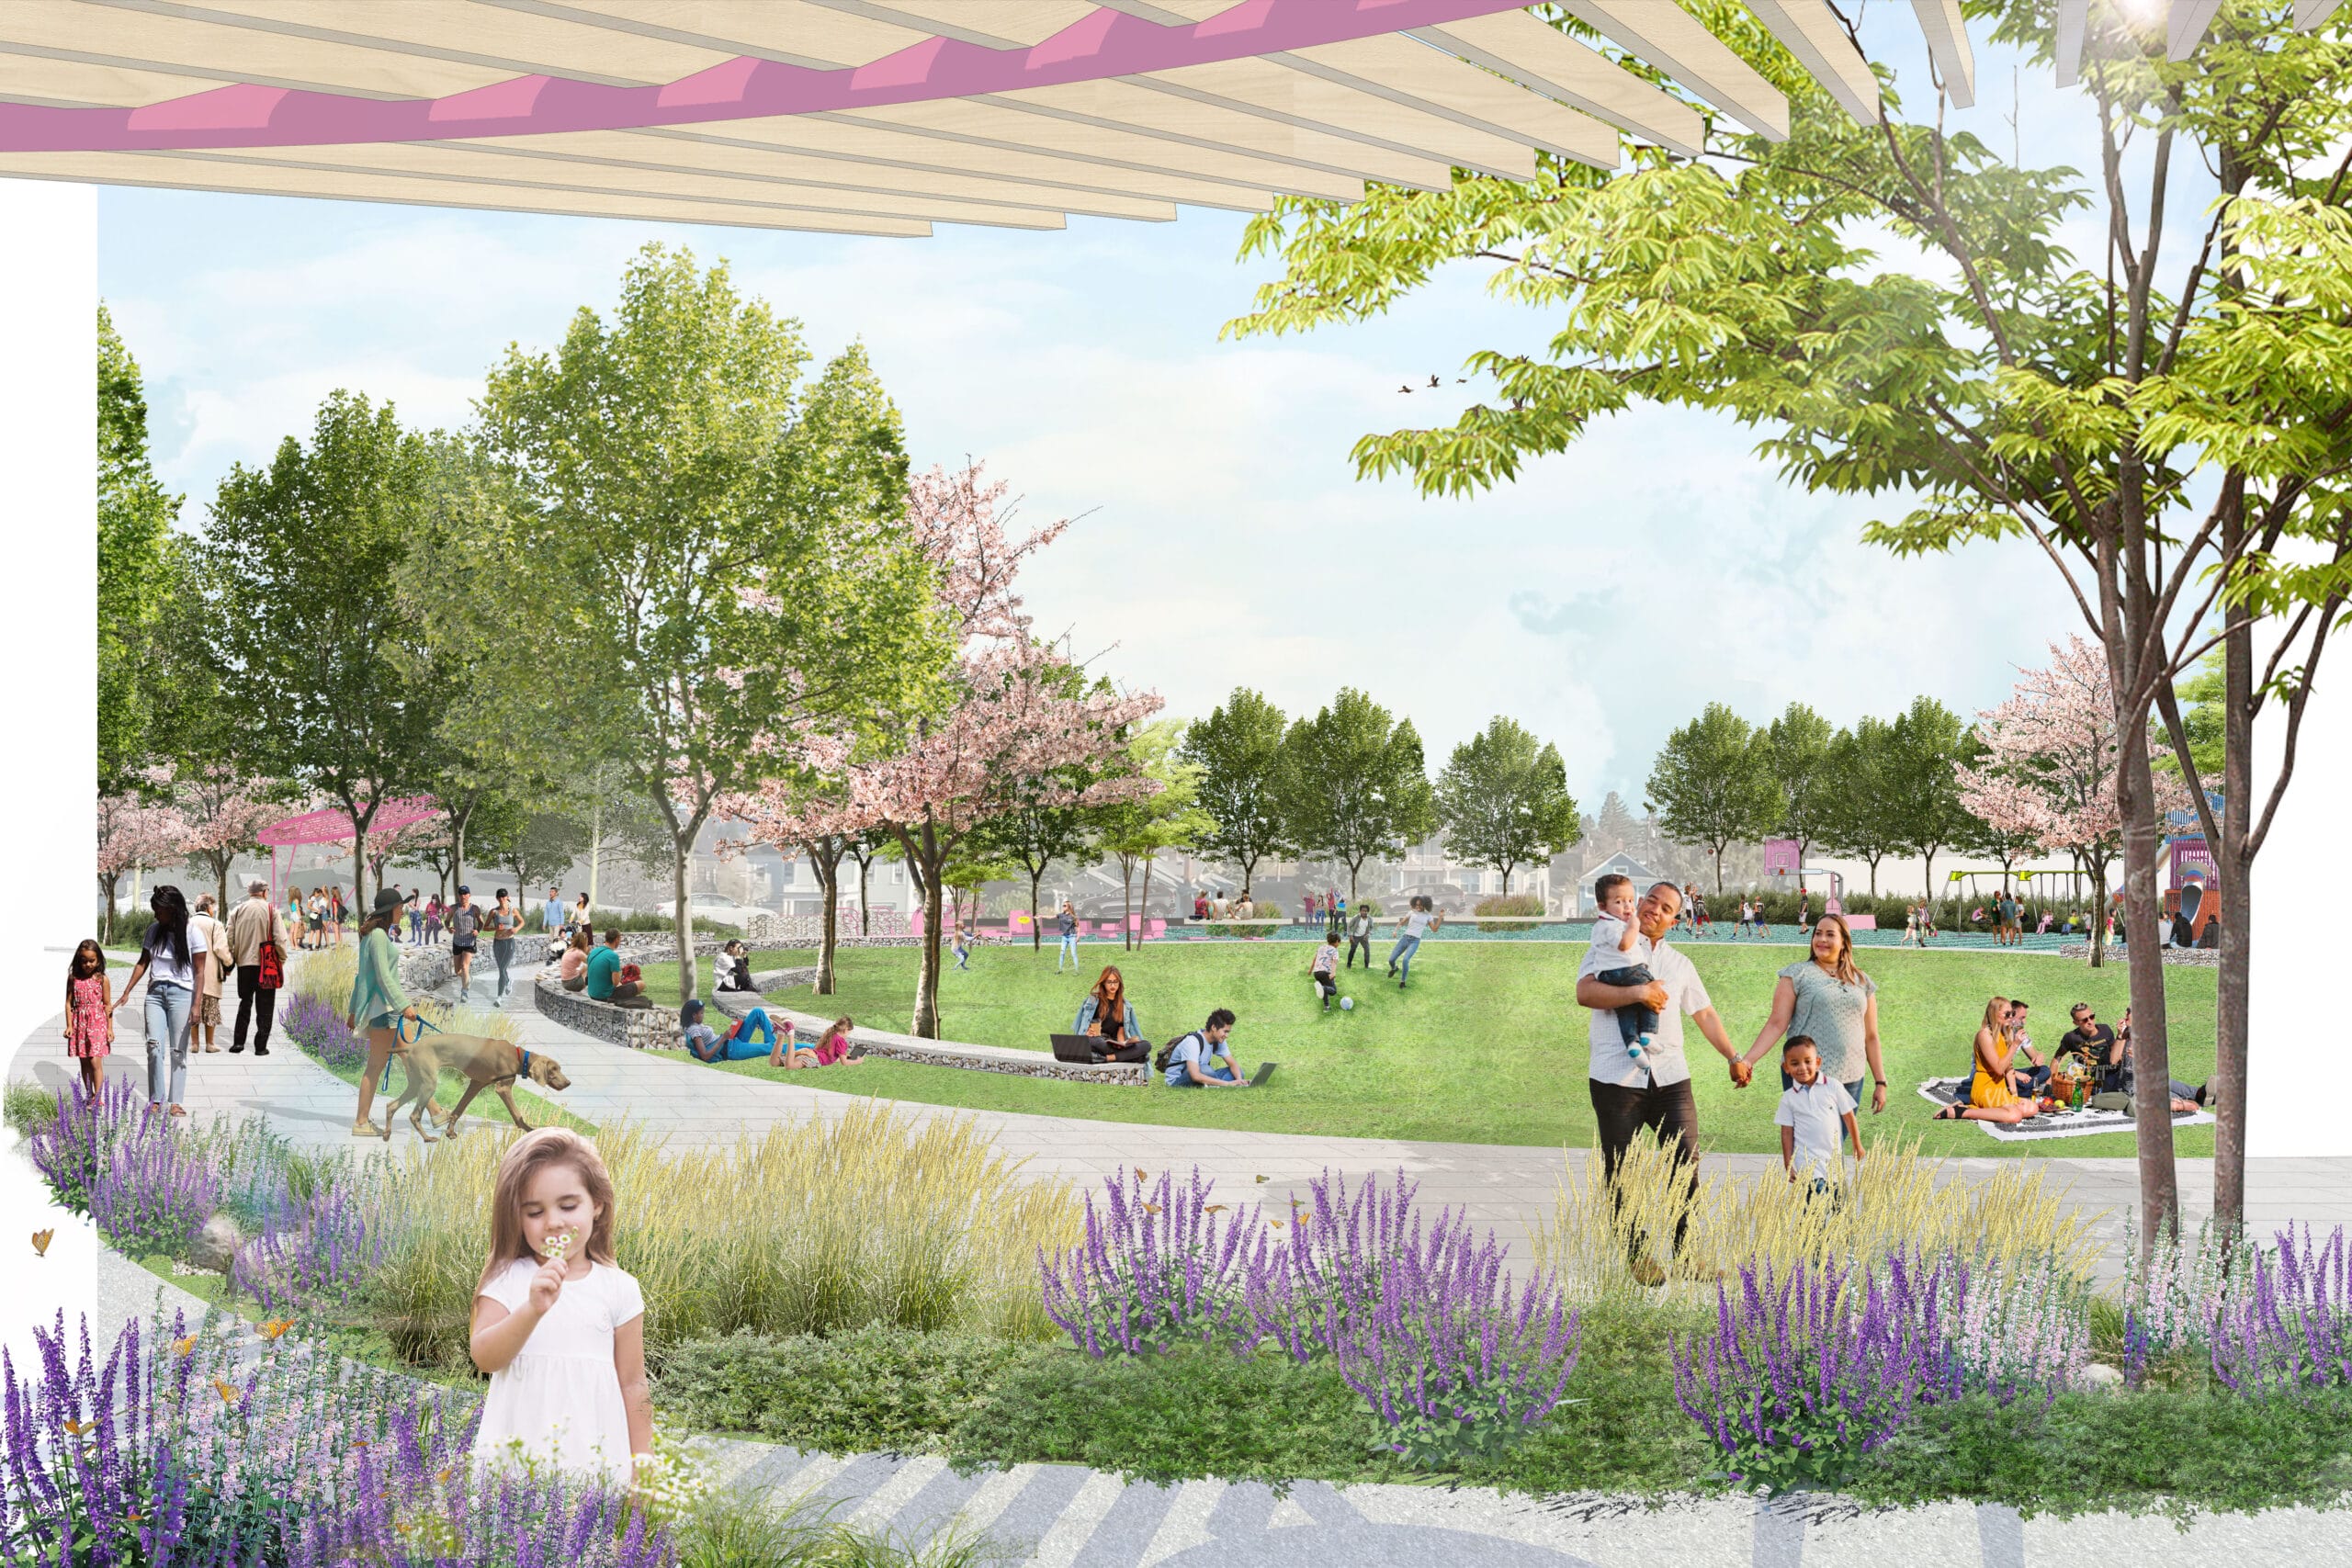 An artist's rendering of a park with children and flowers.